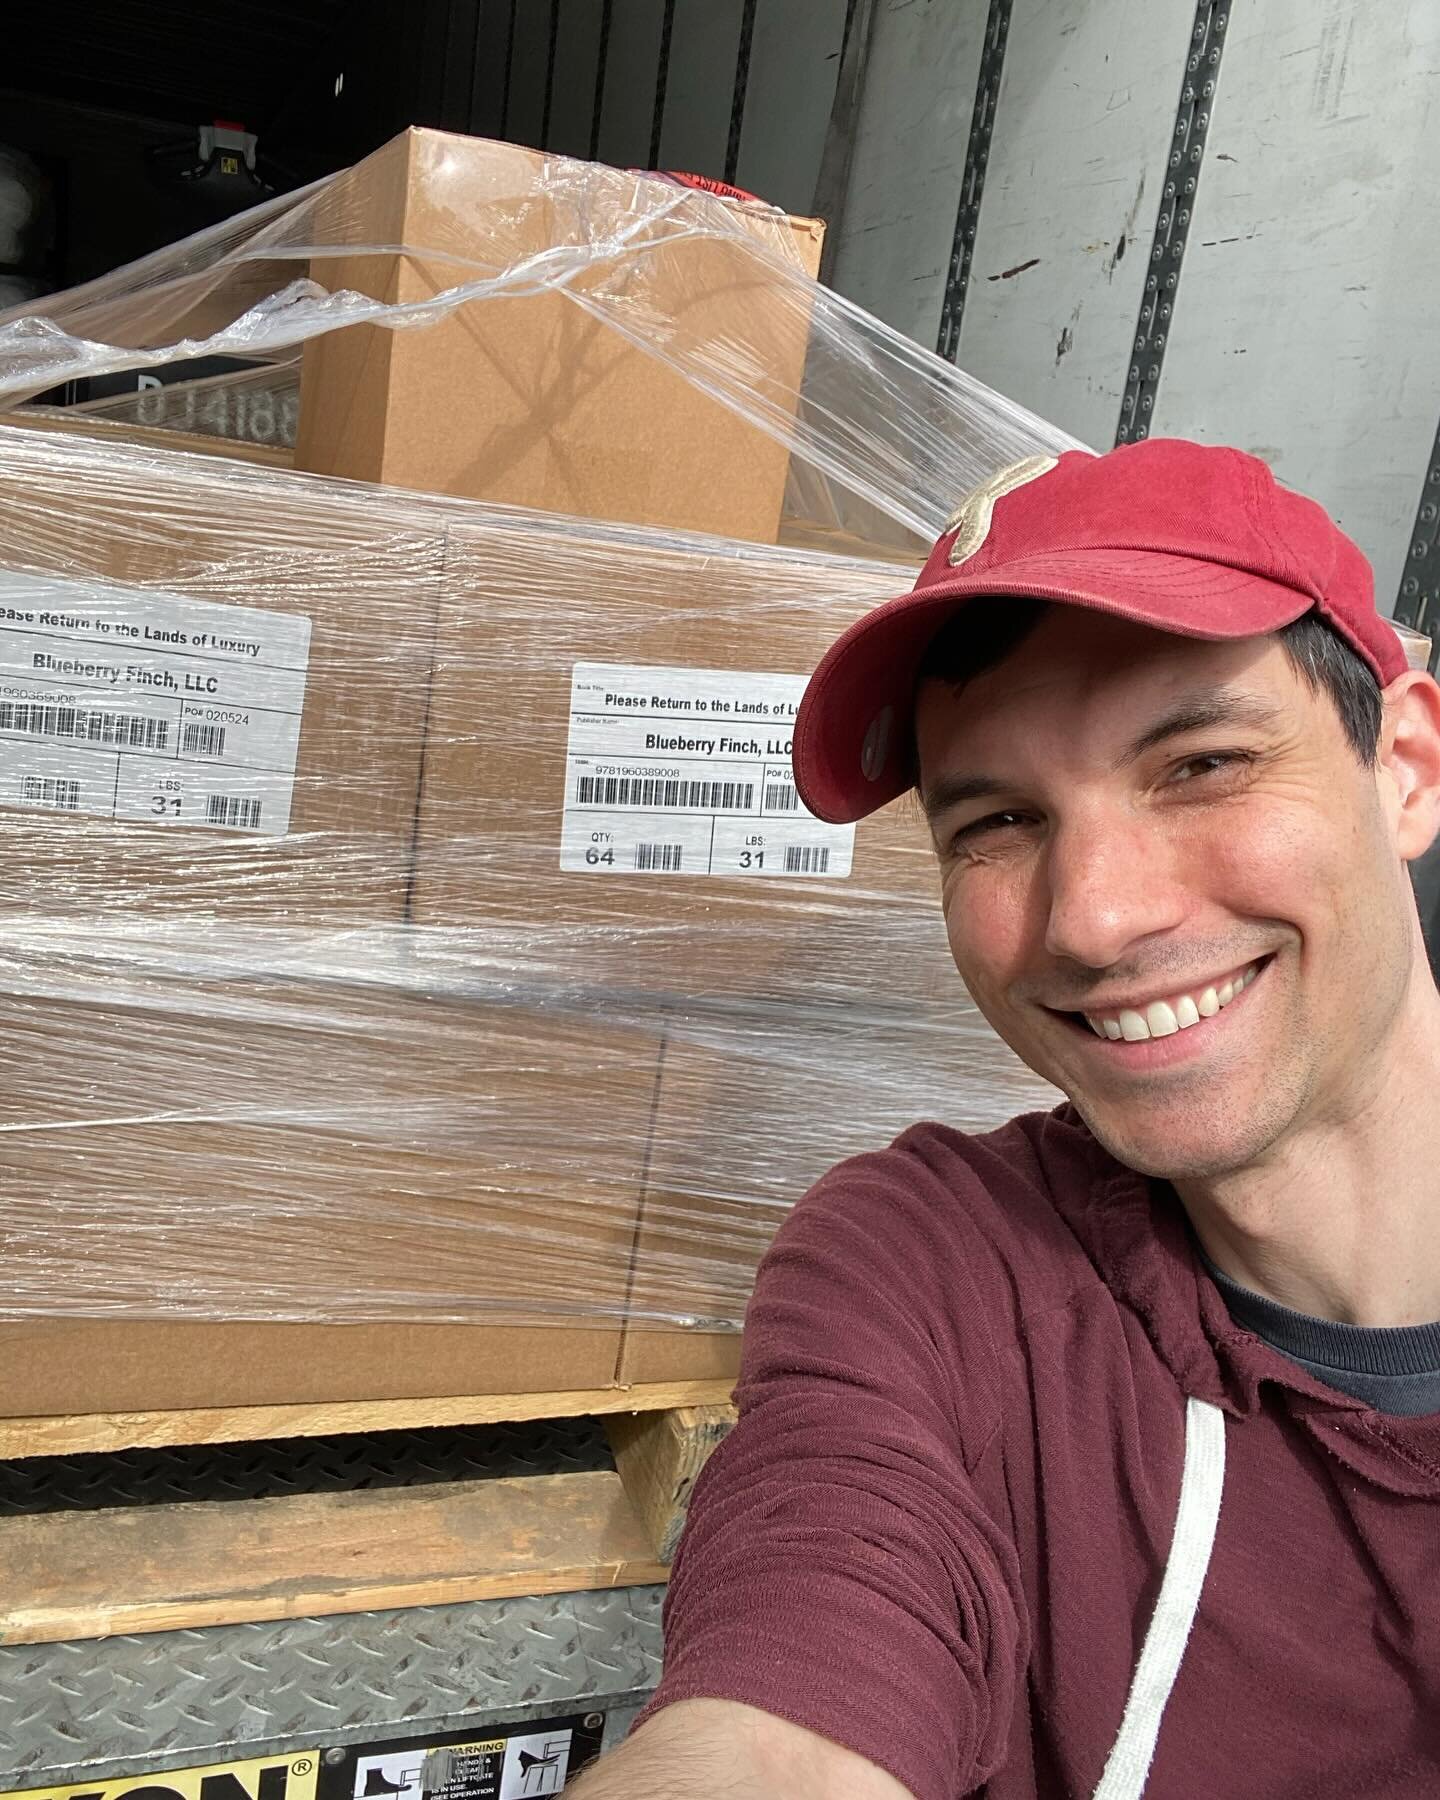 In case you missed it on my stories last week, I got my first pallet of books delivered! So excited to get these in the hands of readers. Thanks to everyone for their support in making this dream possible. I&rsquo;m forever grateful!

#indieauthor #m